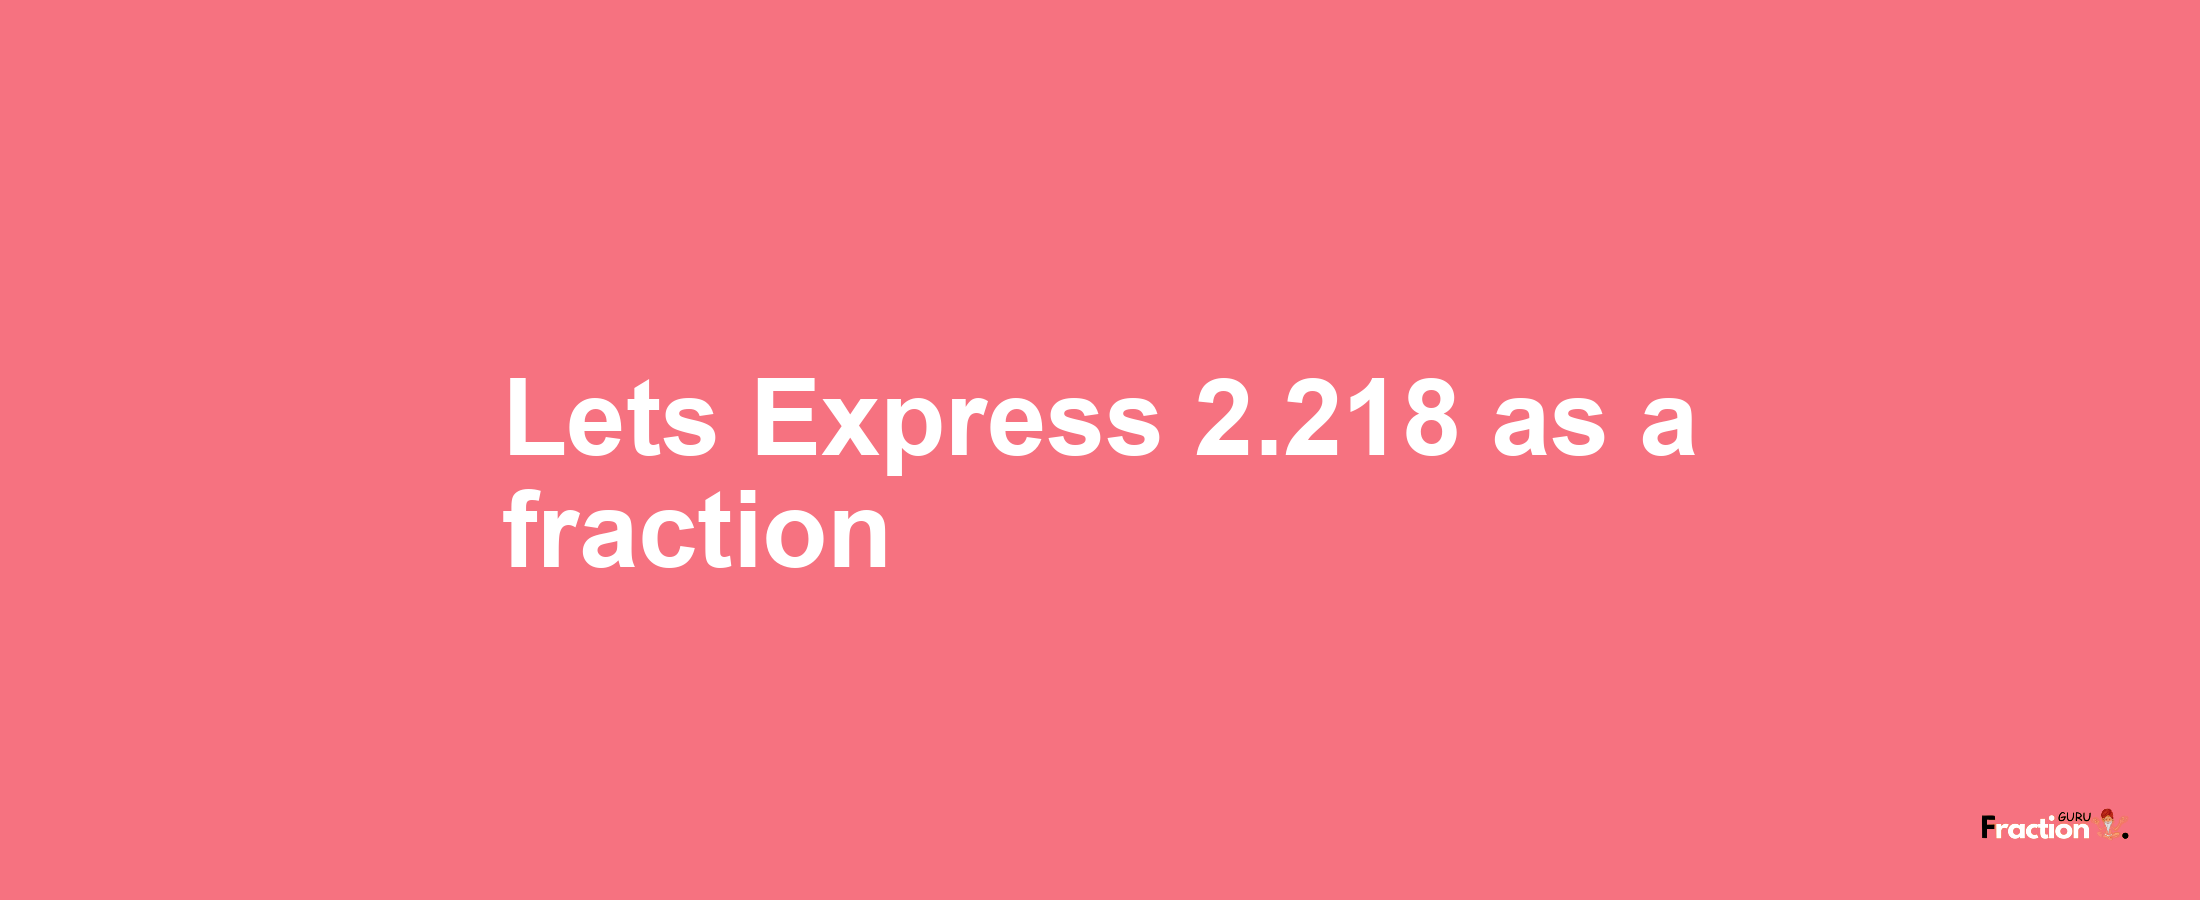 Lets Express 2.218 as afraction